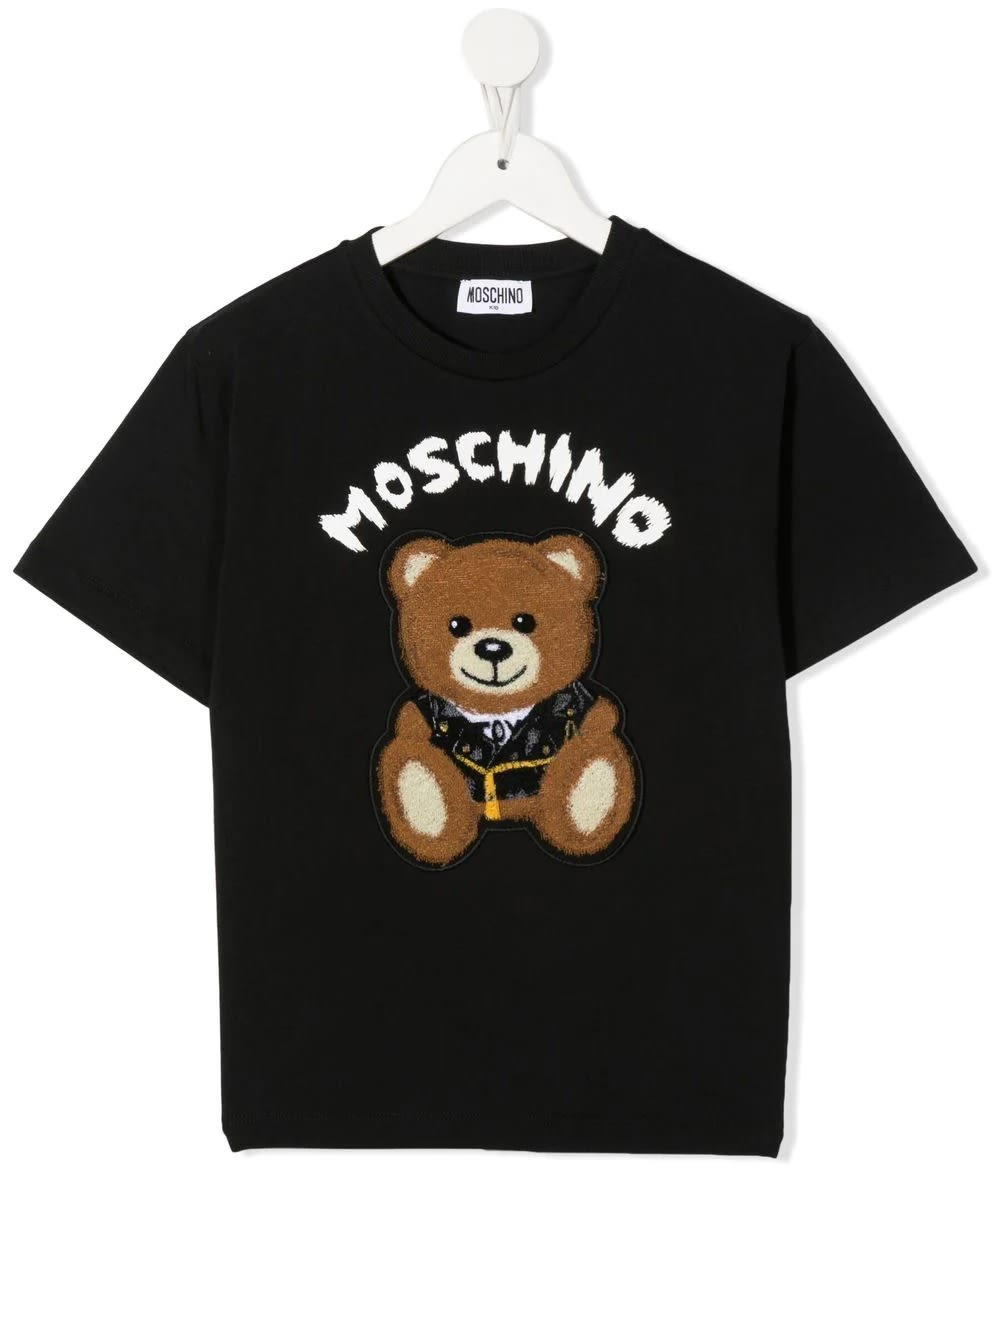 Kids Black T-shirt With Moschino Teddy Bear Embroidery